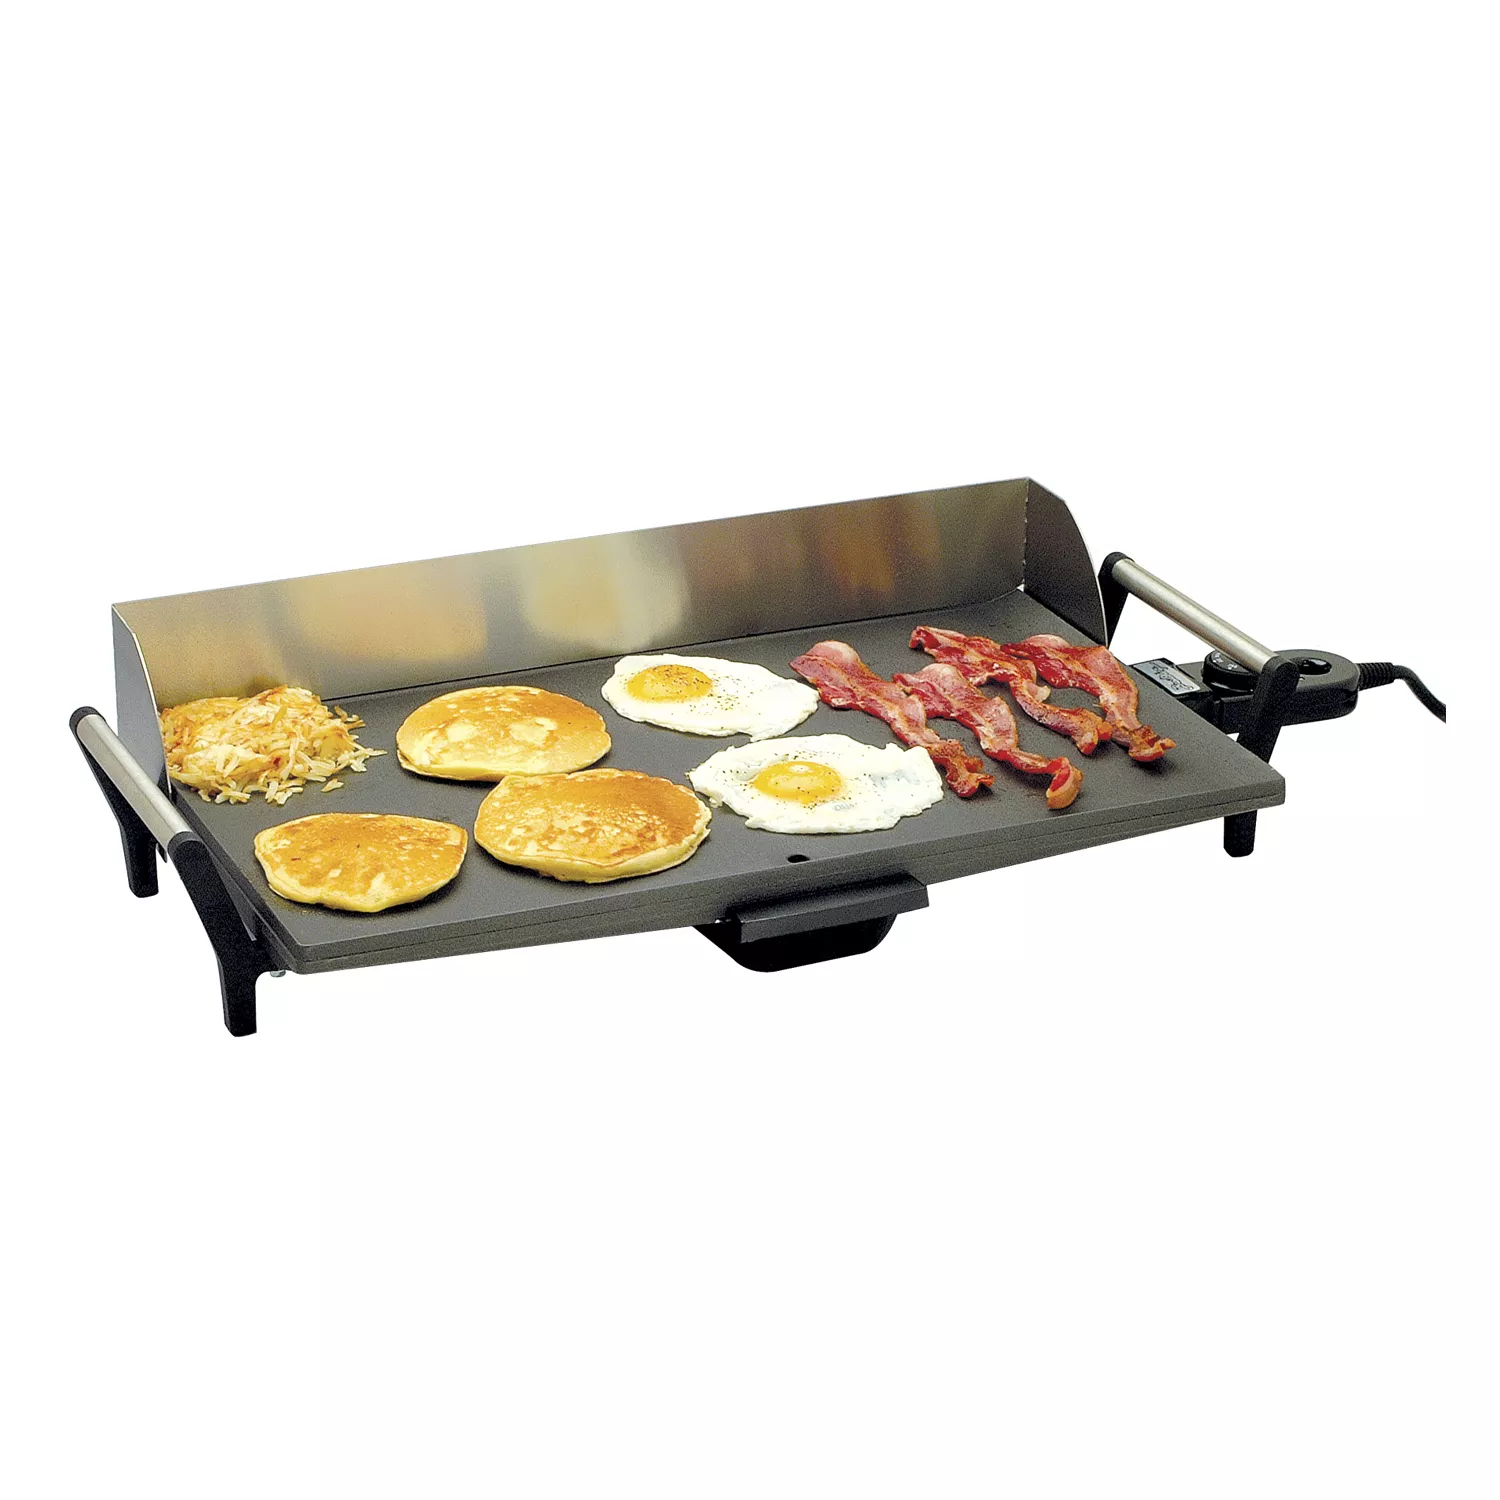 Photos - Other kitchen appliances Broil King BroilKing Professional Griddle PCG-10 